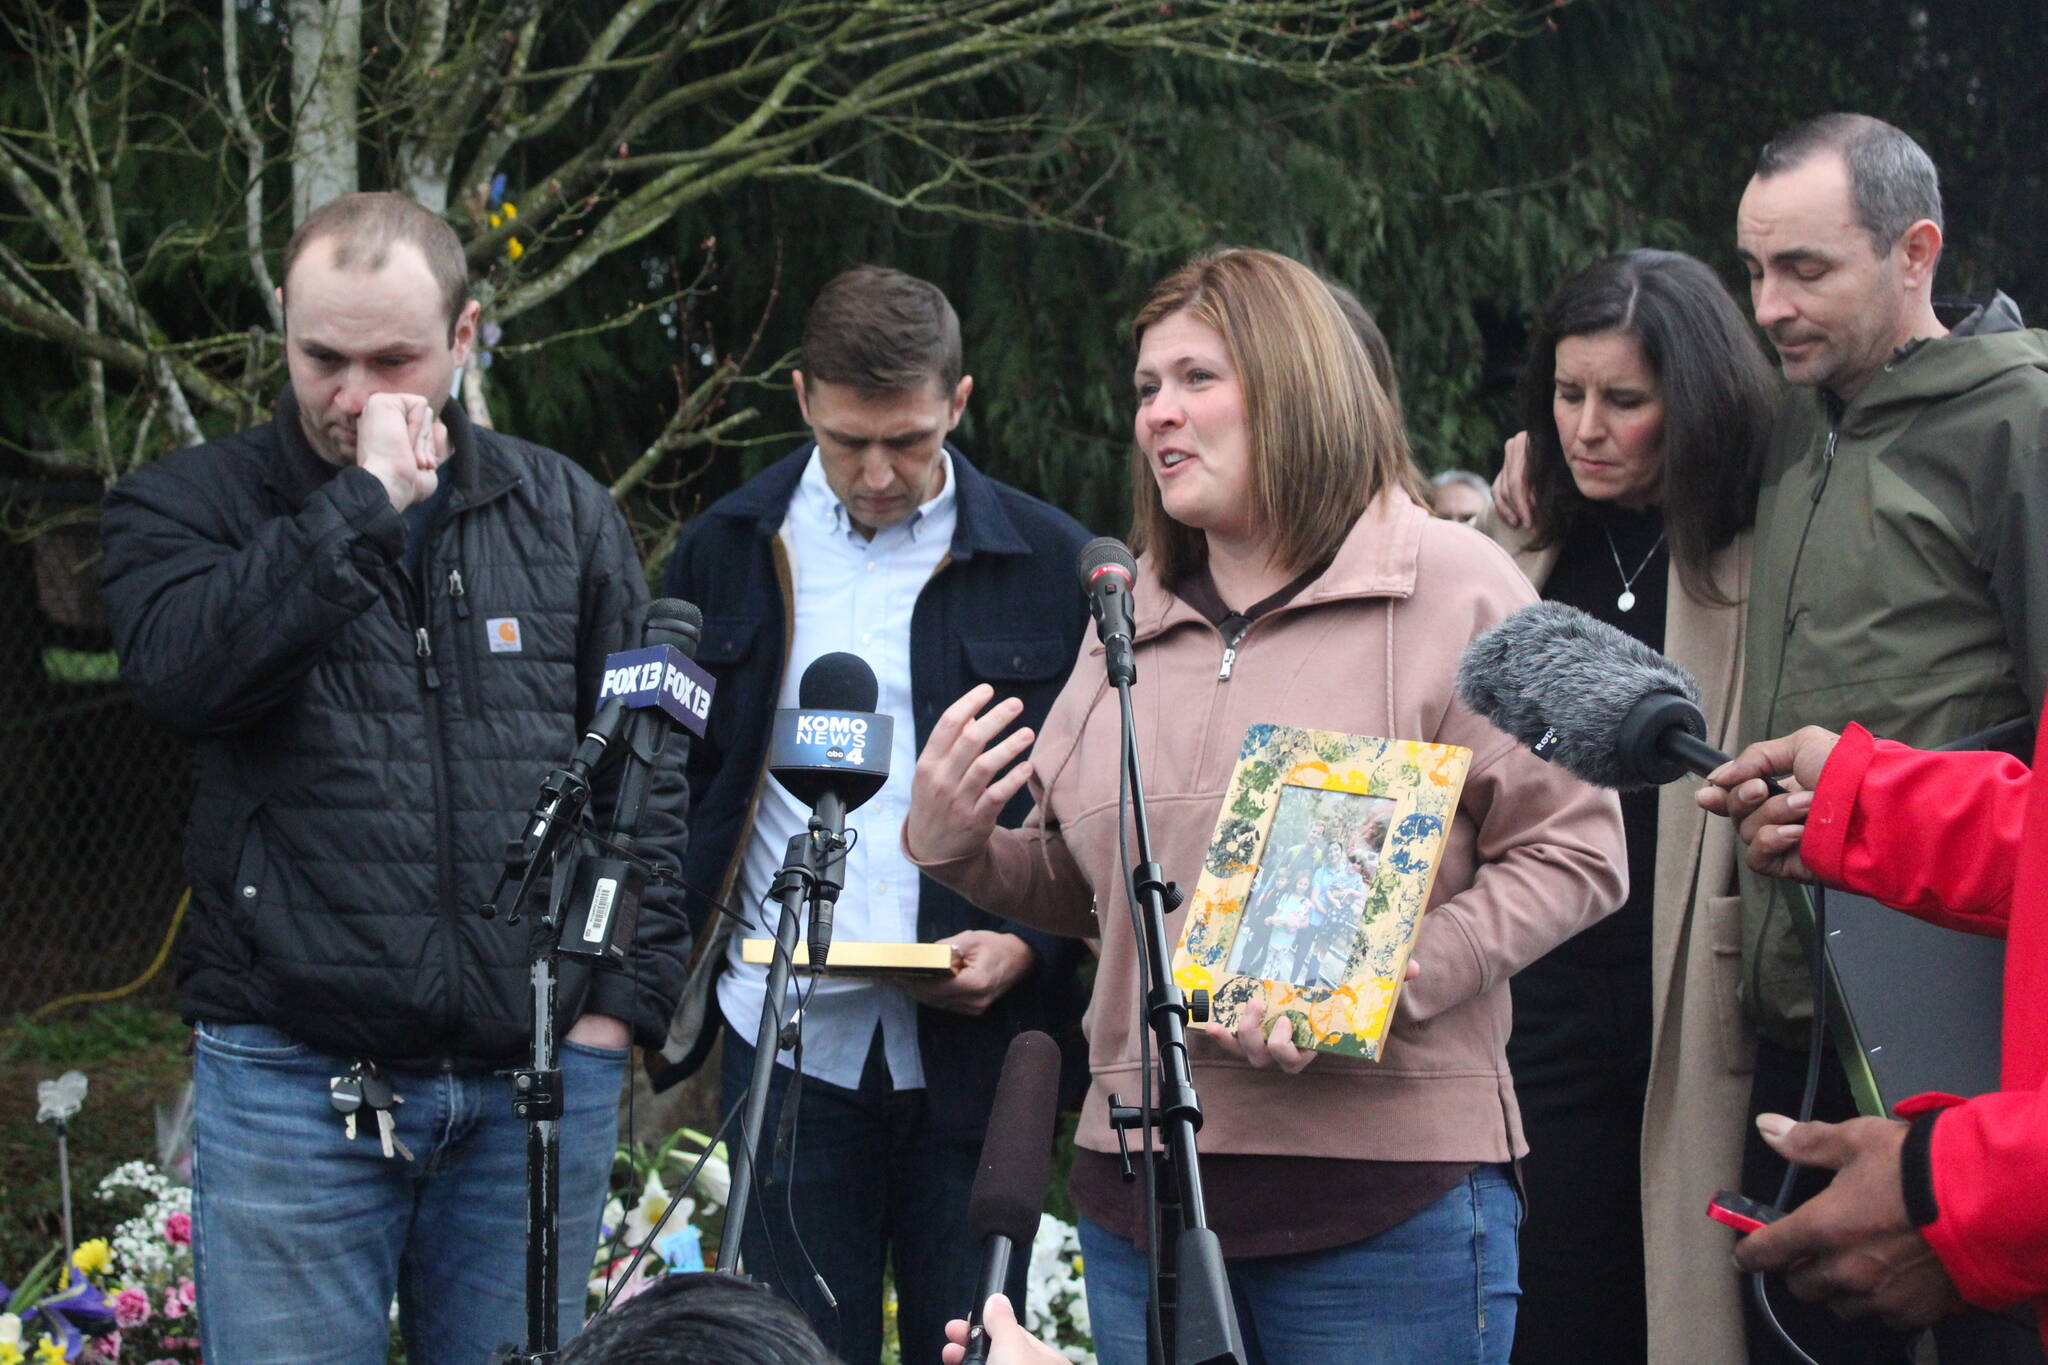 Photo by Bailey Jo Josie/Sound Publishing
Melanie Hanes (center) talks about her sister, Andrea Hudson at press conference held at the site of the deadly March 19 crash near Renton. From left to right: Issac Smith, Chase Wilcoxson, Hanes, Jessica Brown, Jaron Brown.